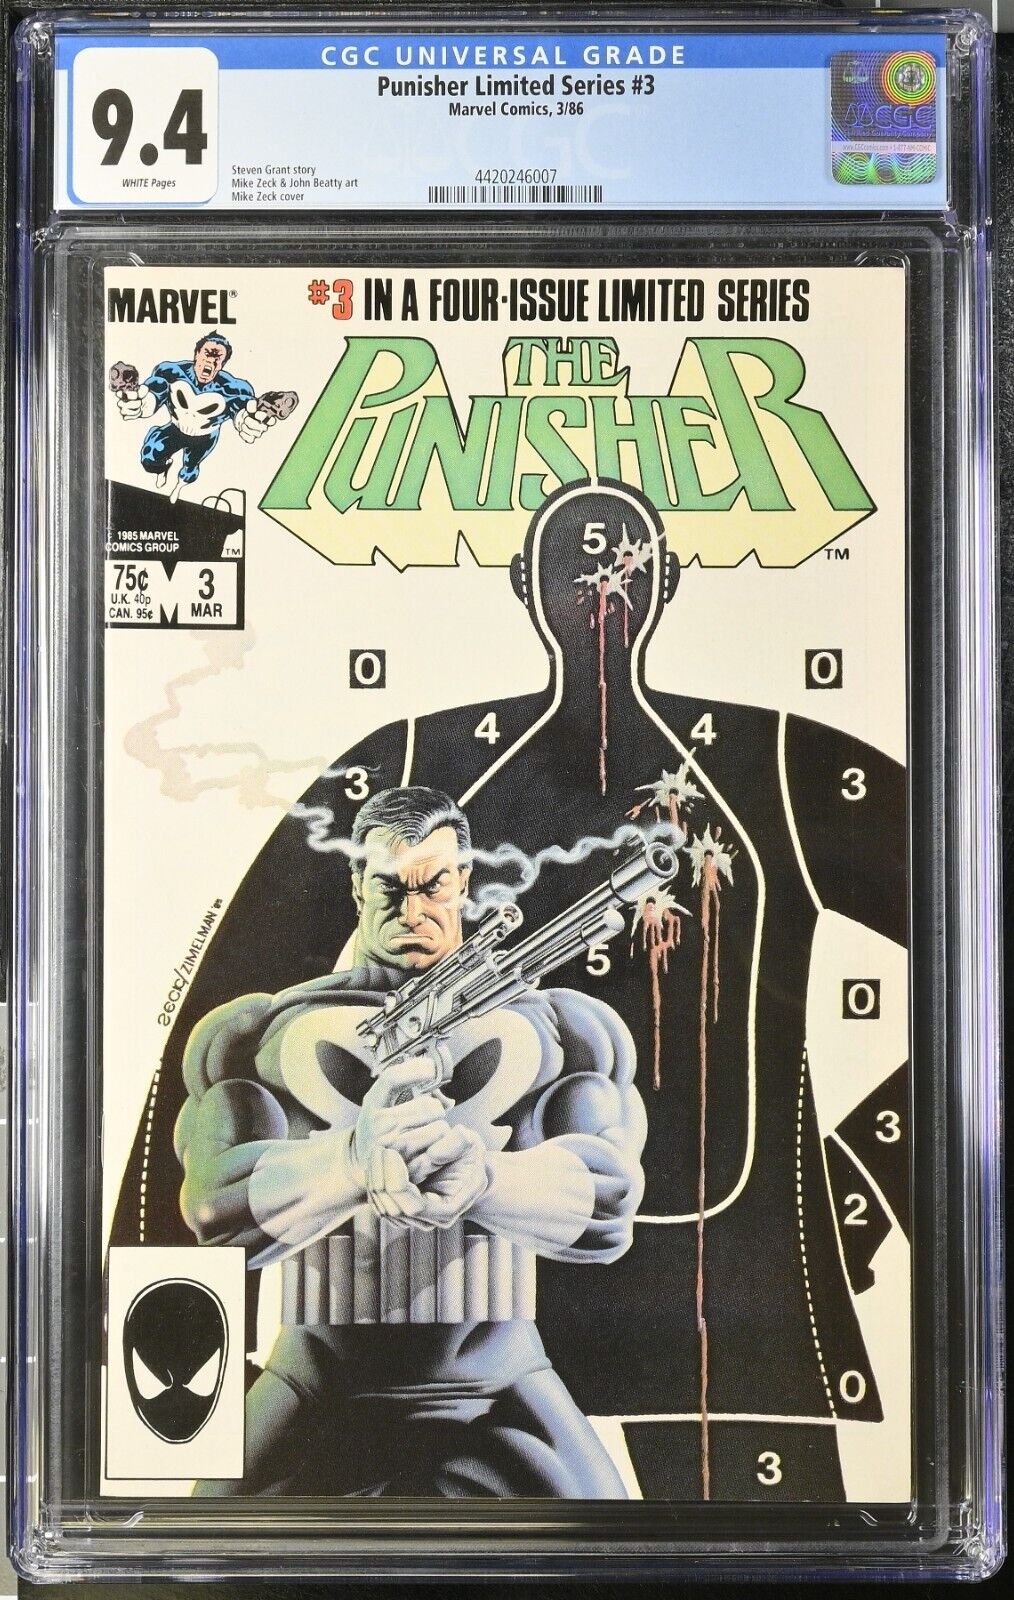 🔑🔥🔥🔥Punisher Limited Series #3 CGC 9.4 Zeck Cover Marvel Comics 1986 246007